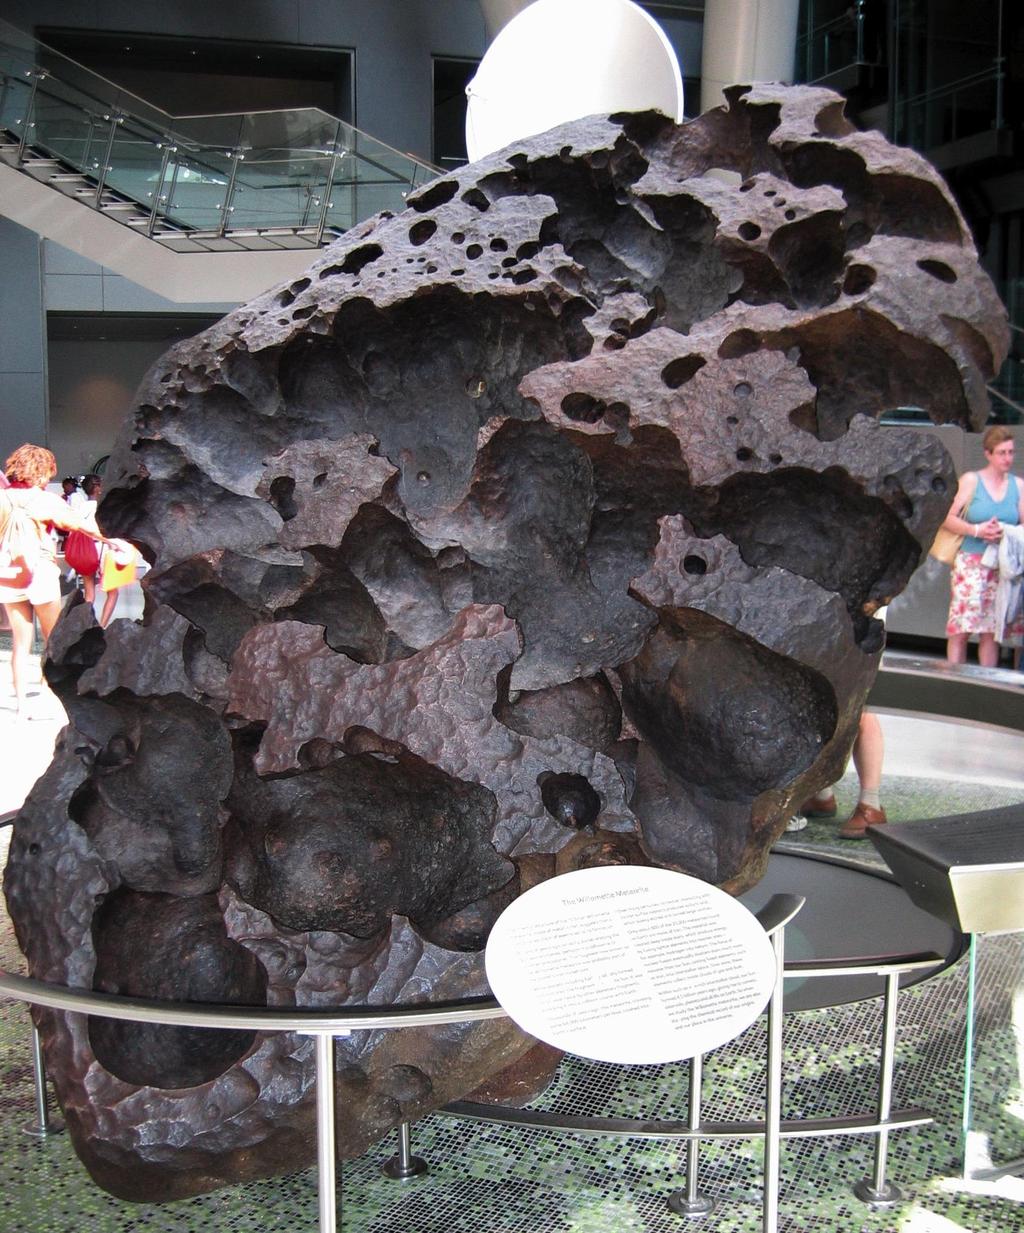 The Willamette Meteorite is an iron-nickel meteorite discovered in the USA.